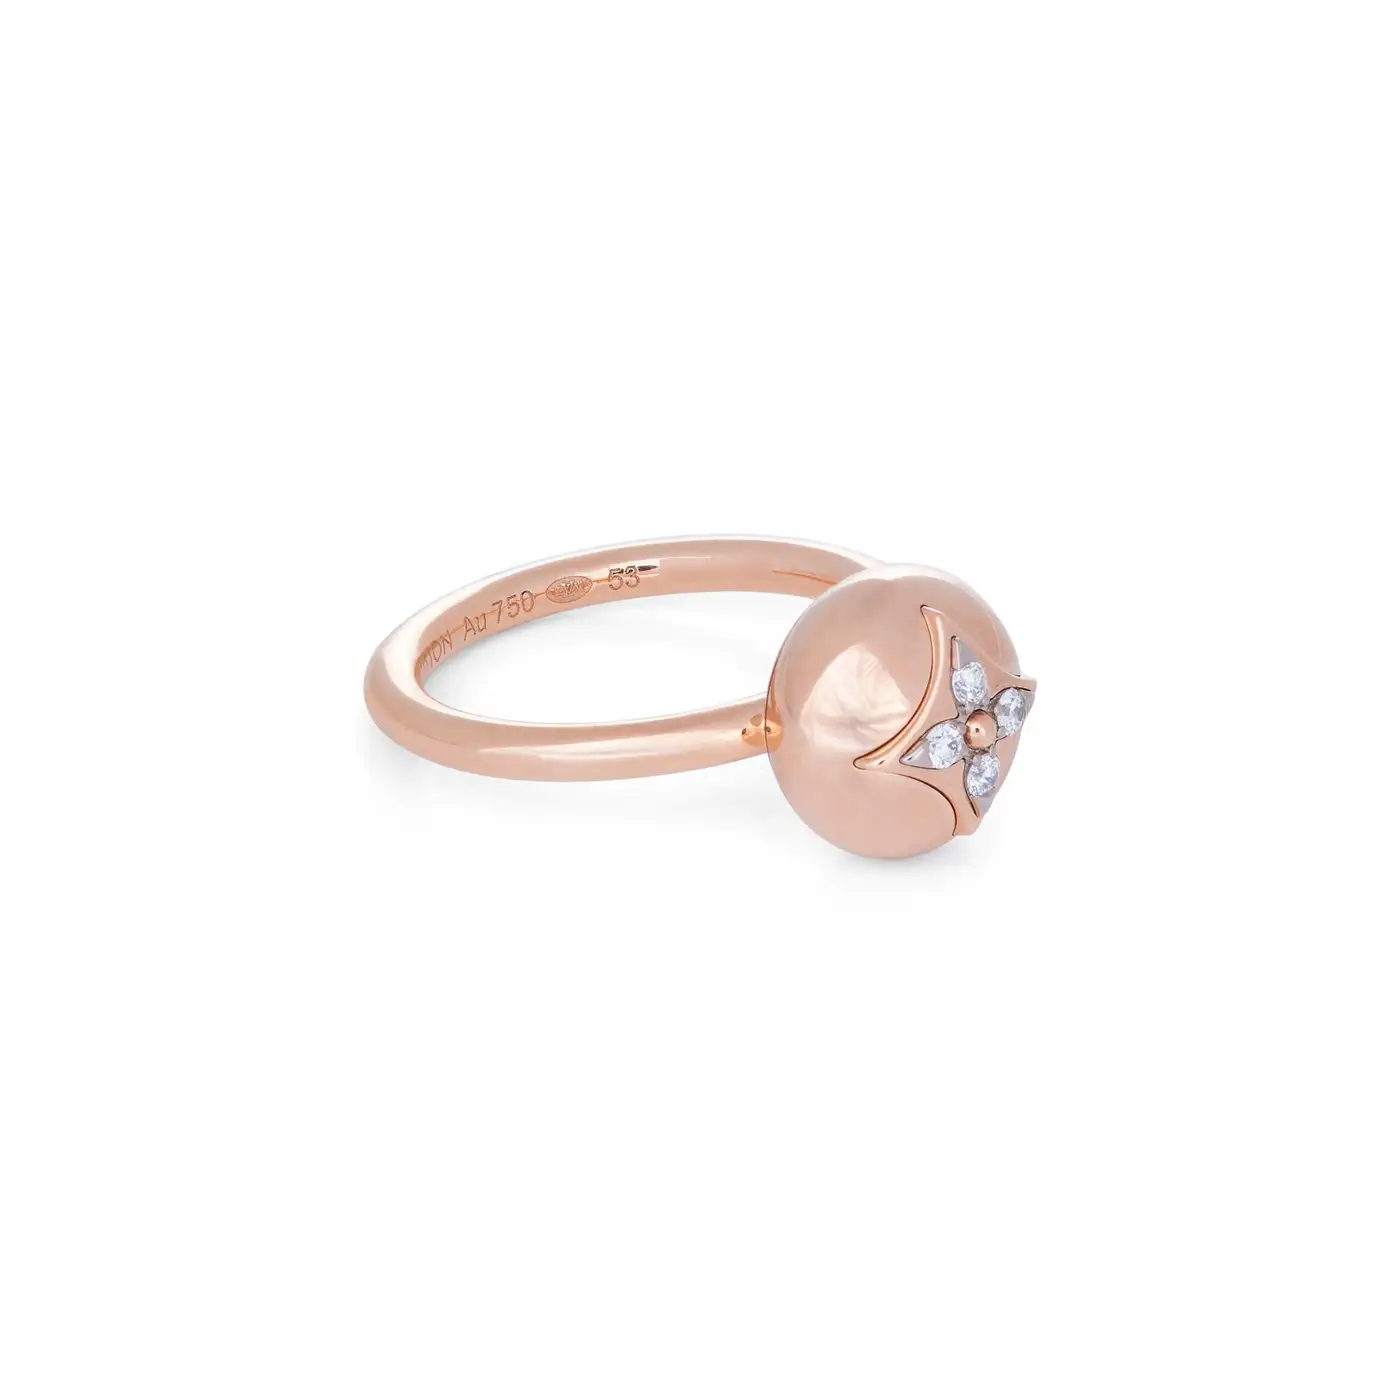 Louis-Vuitton-B-Blossom-Gold-and-Diamond-Ring-3.webp